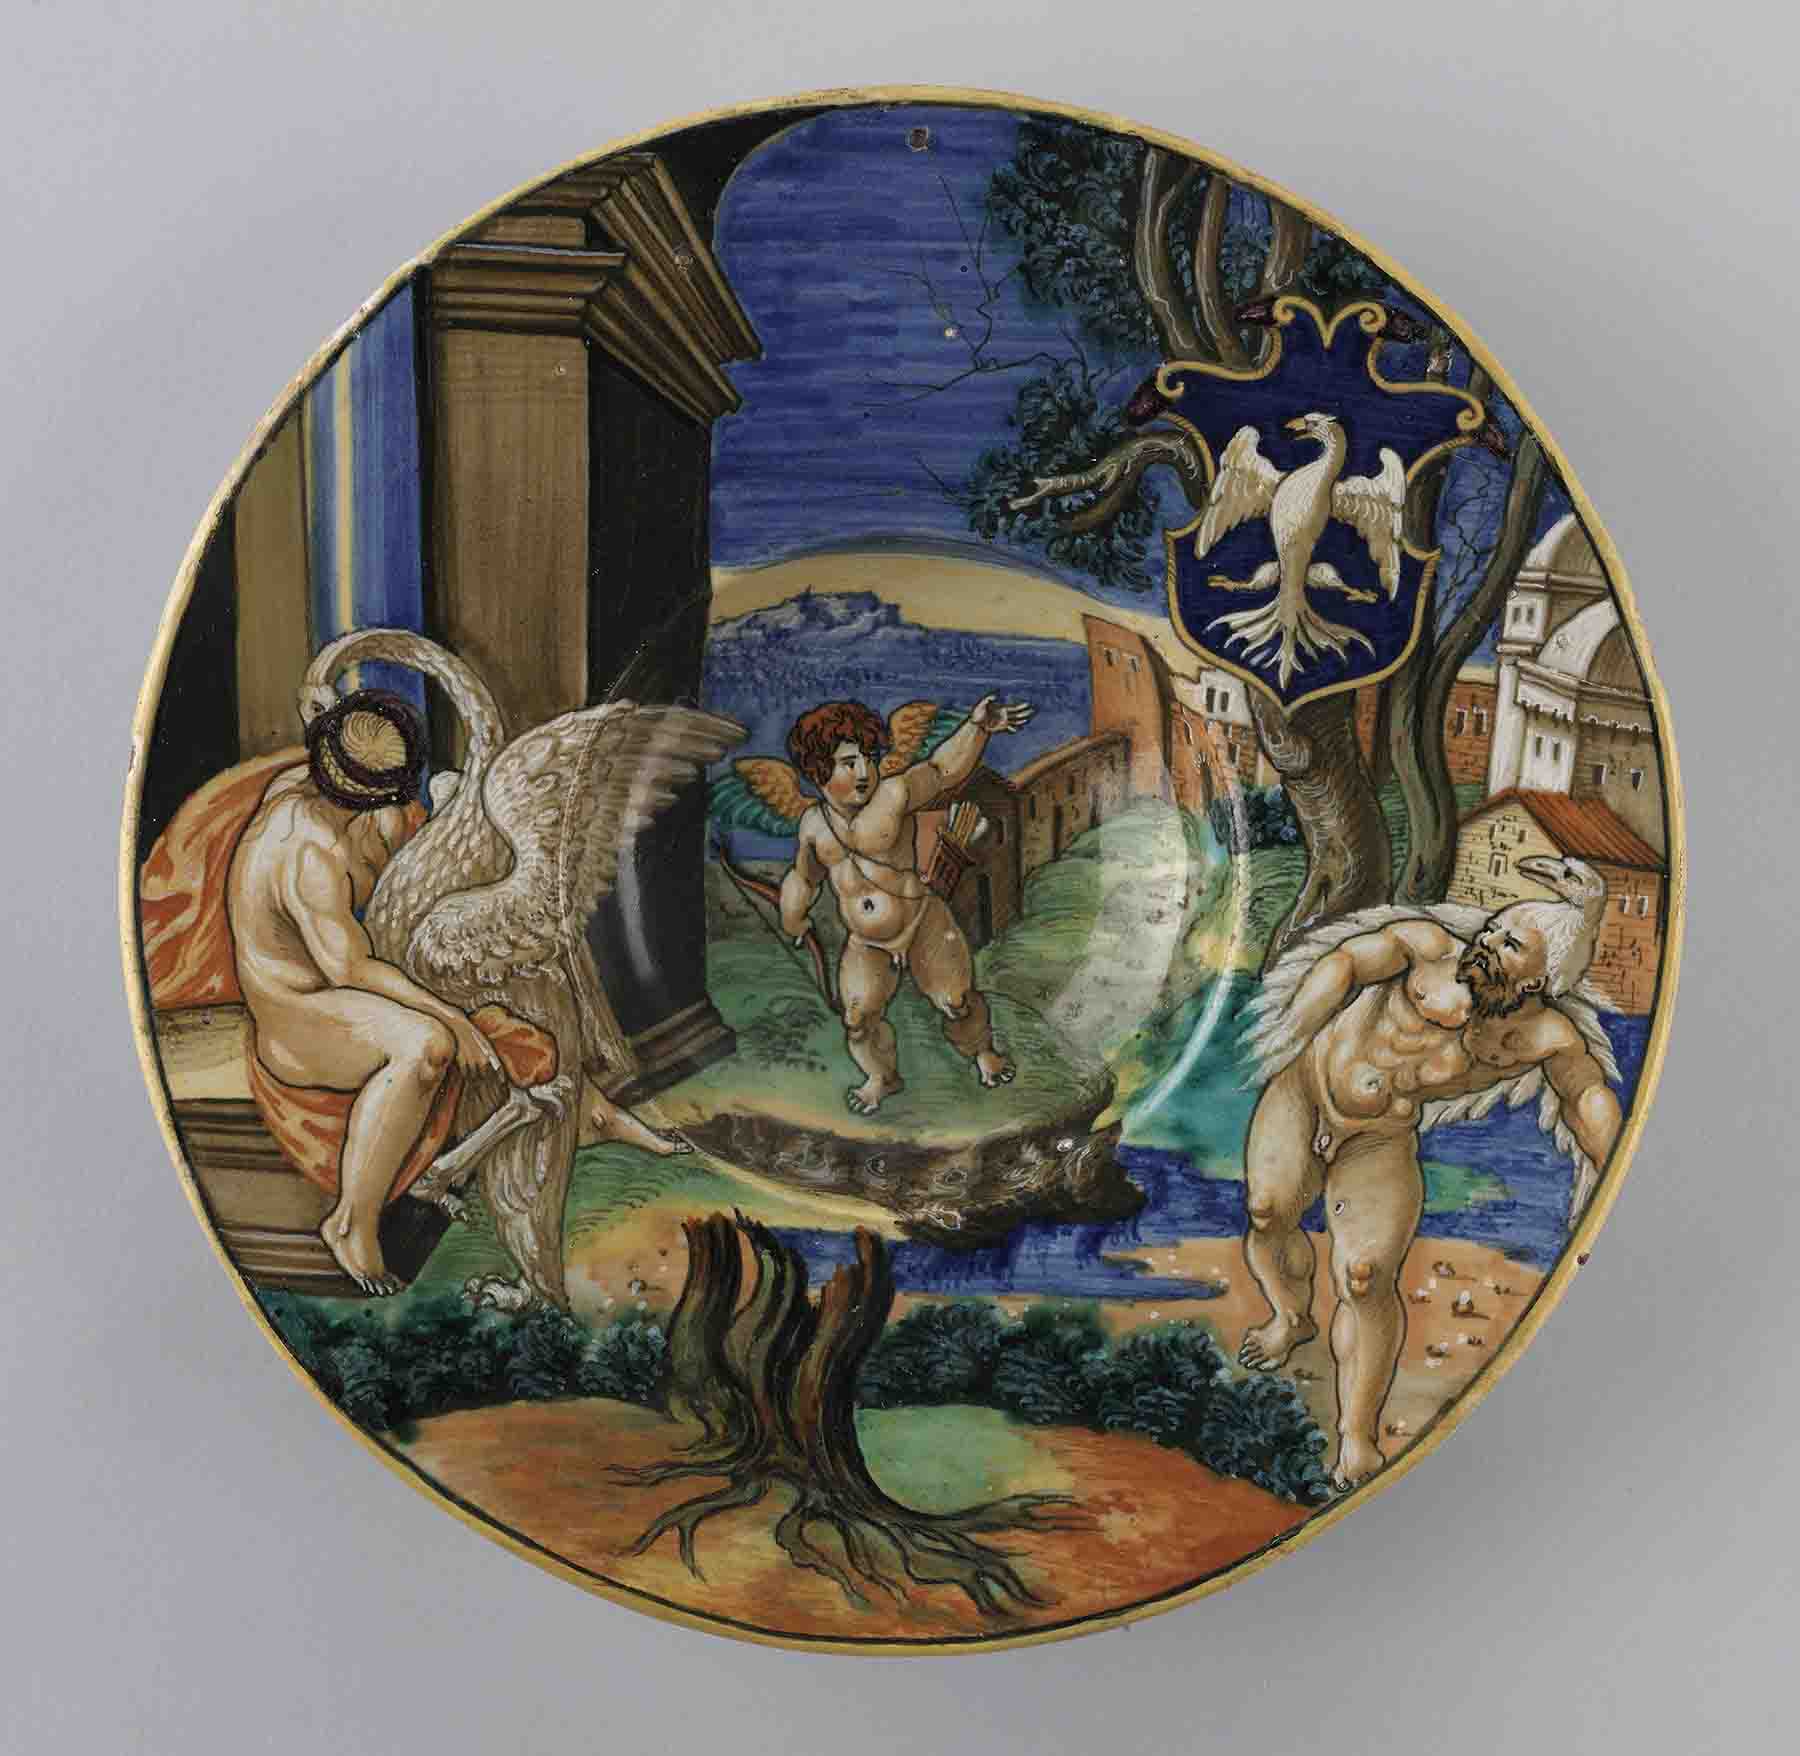 Painted serving dish by Francesco Xanto Avelli